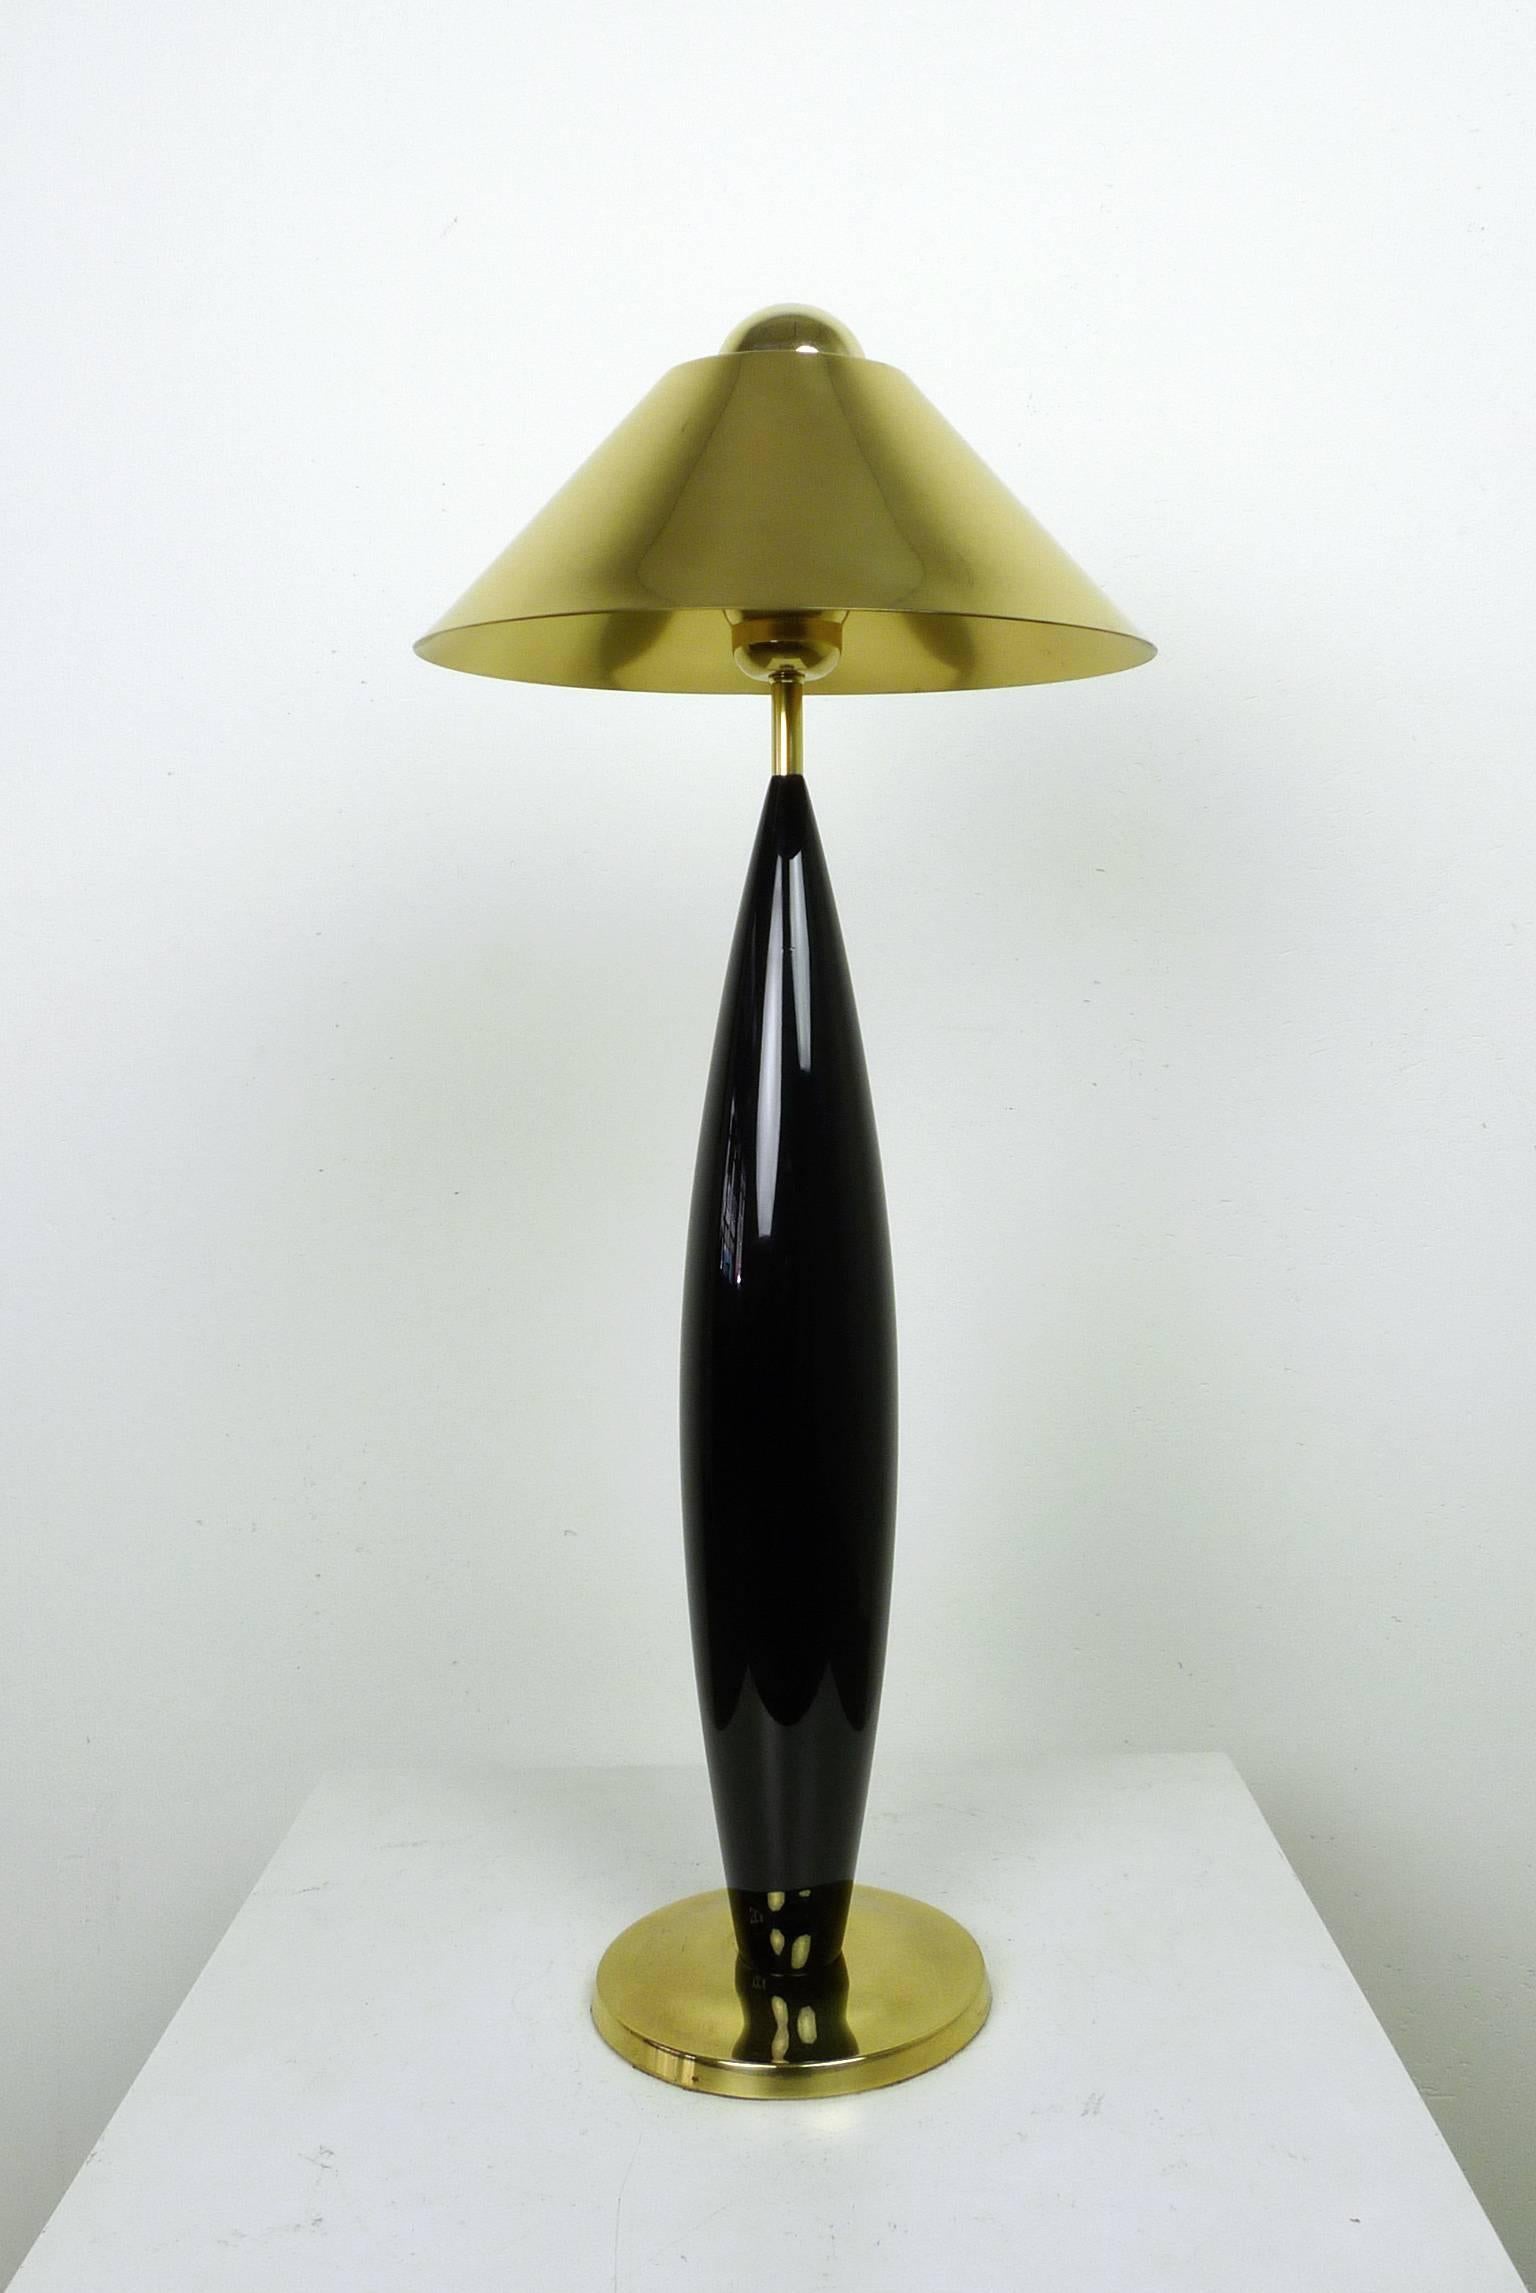 Pair of classical style French table lamps from the 1970s.
Each lamp features a golden metal shade and an elegant curved black body.
Inside is one socket for E 27 bulbs.
The set is in good original condition.